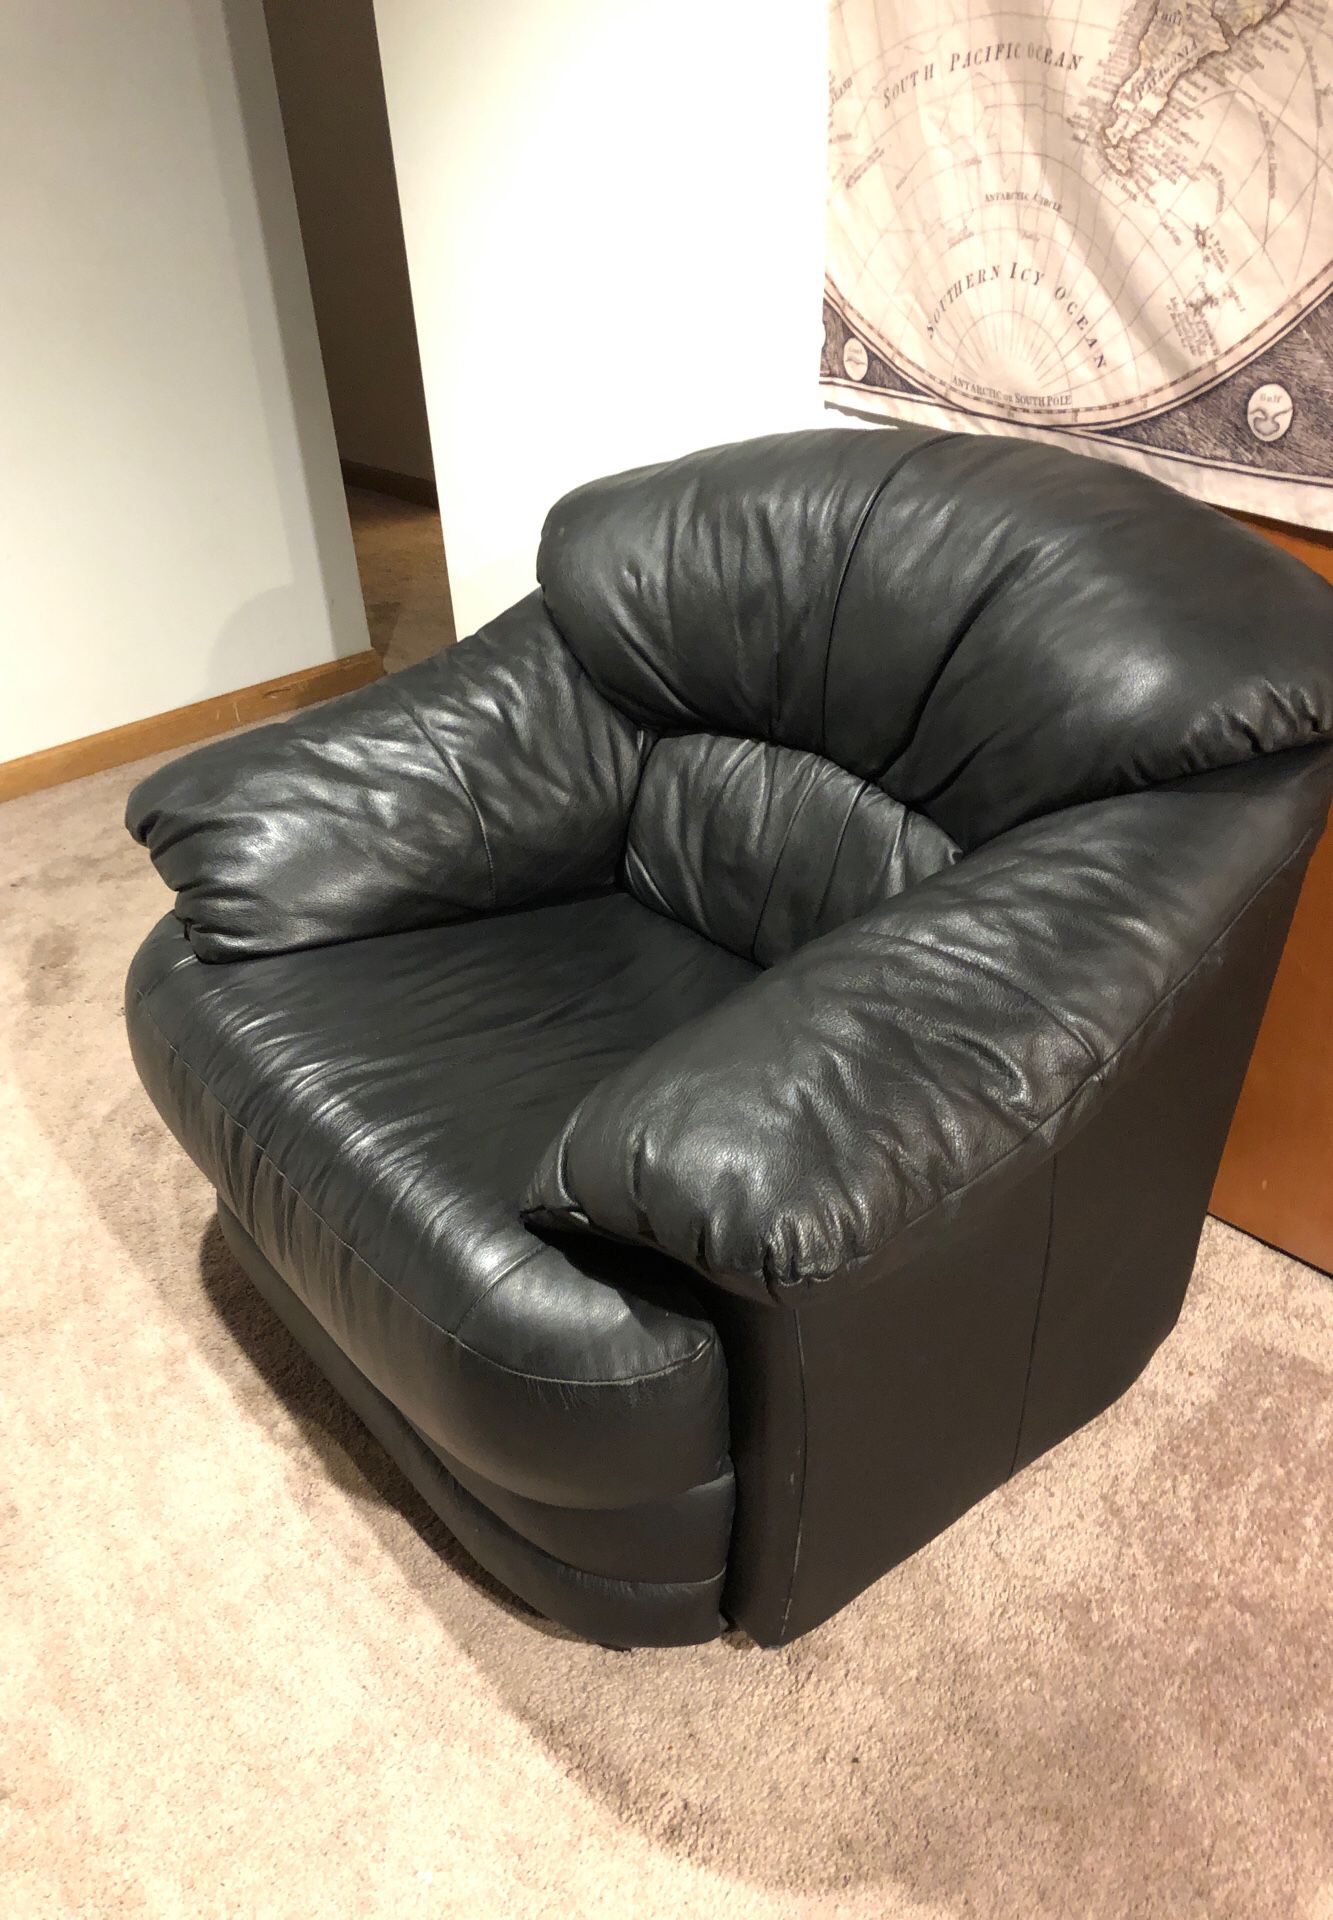 Super comfy black leather chair